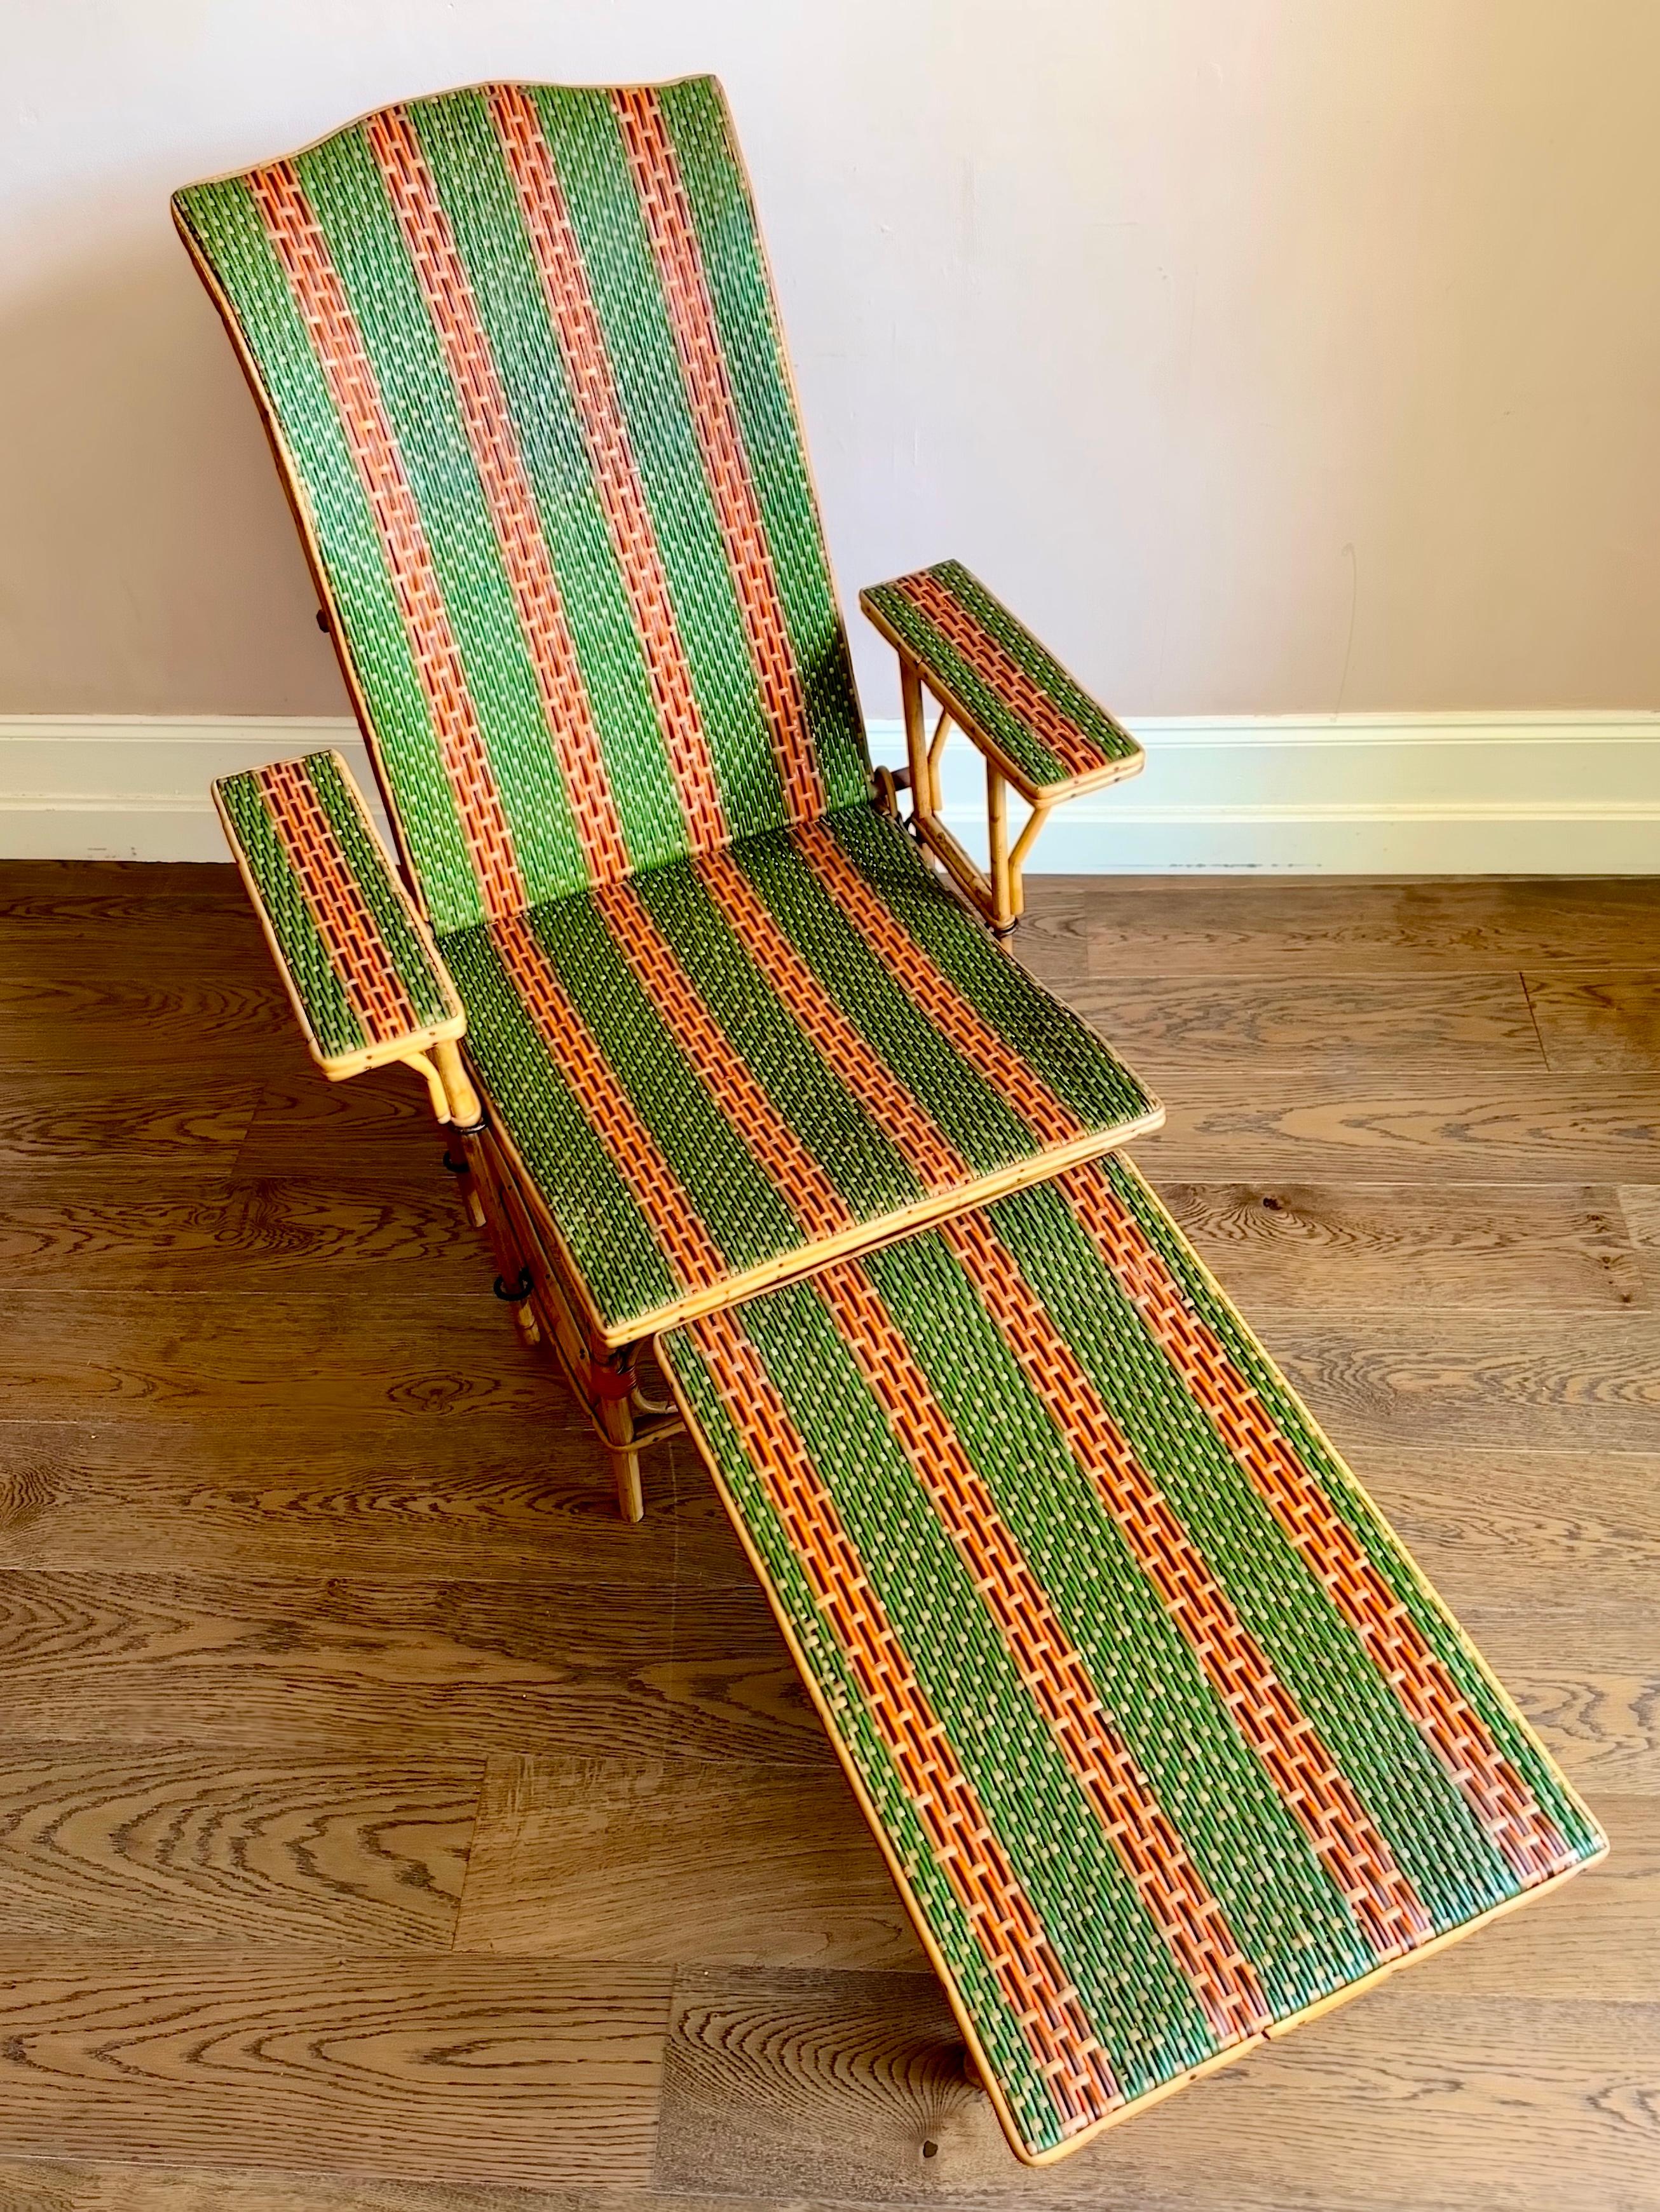 Art Deco Early C20th French Bamboo & Rattan Chaise Longue Sun Lounger For Sale